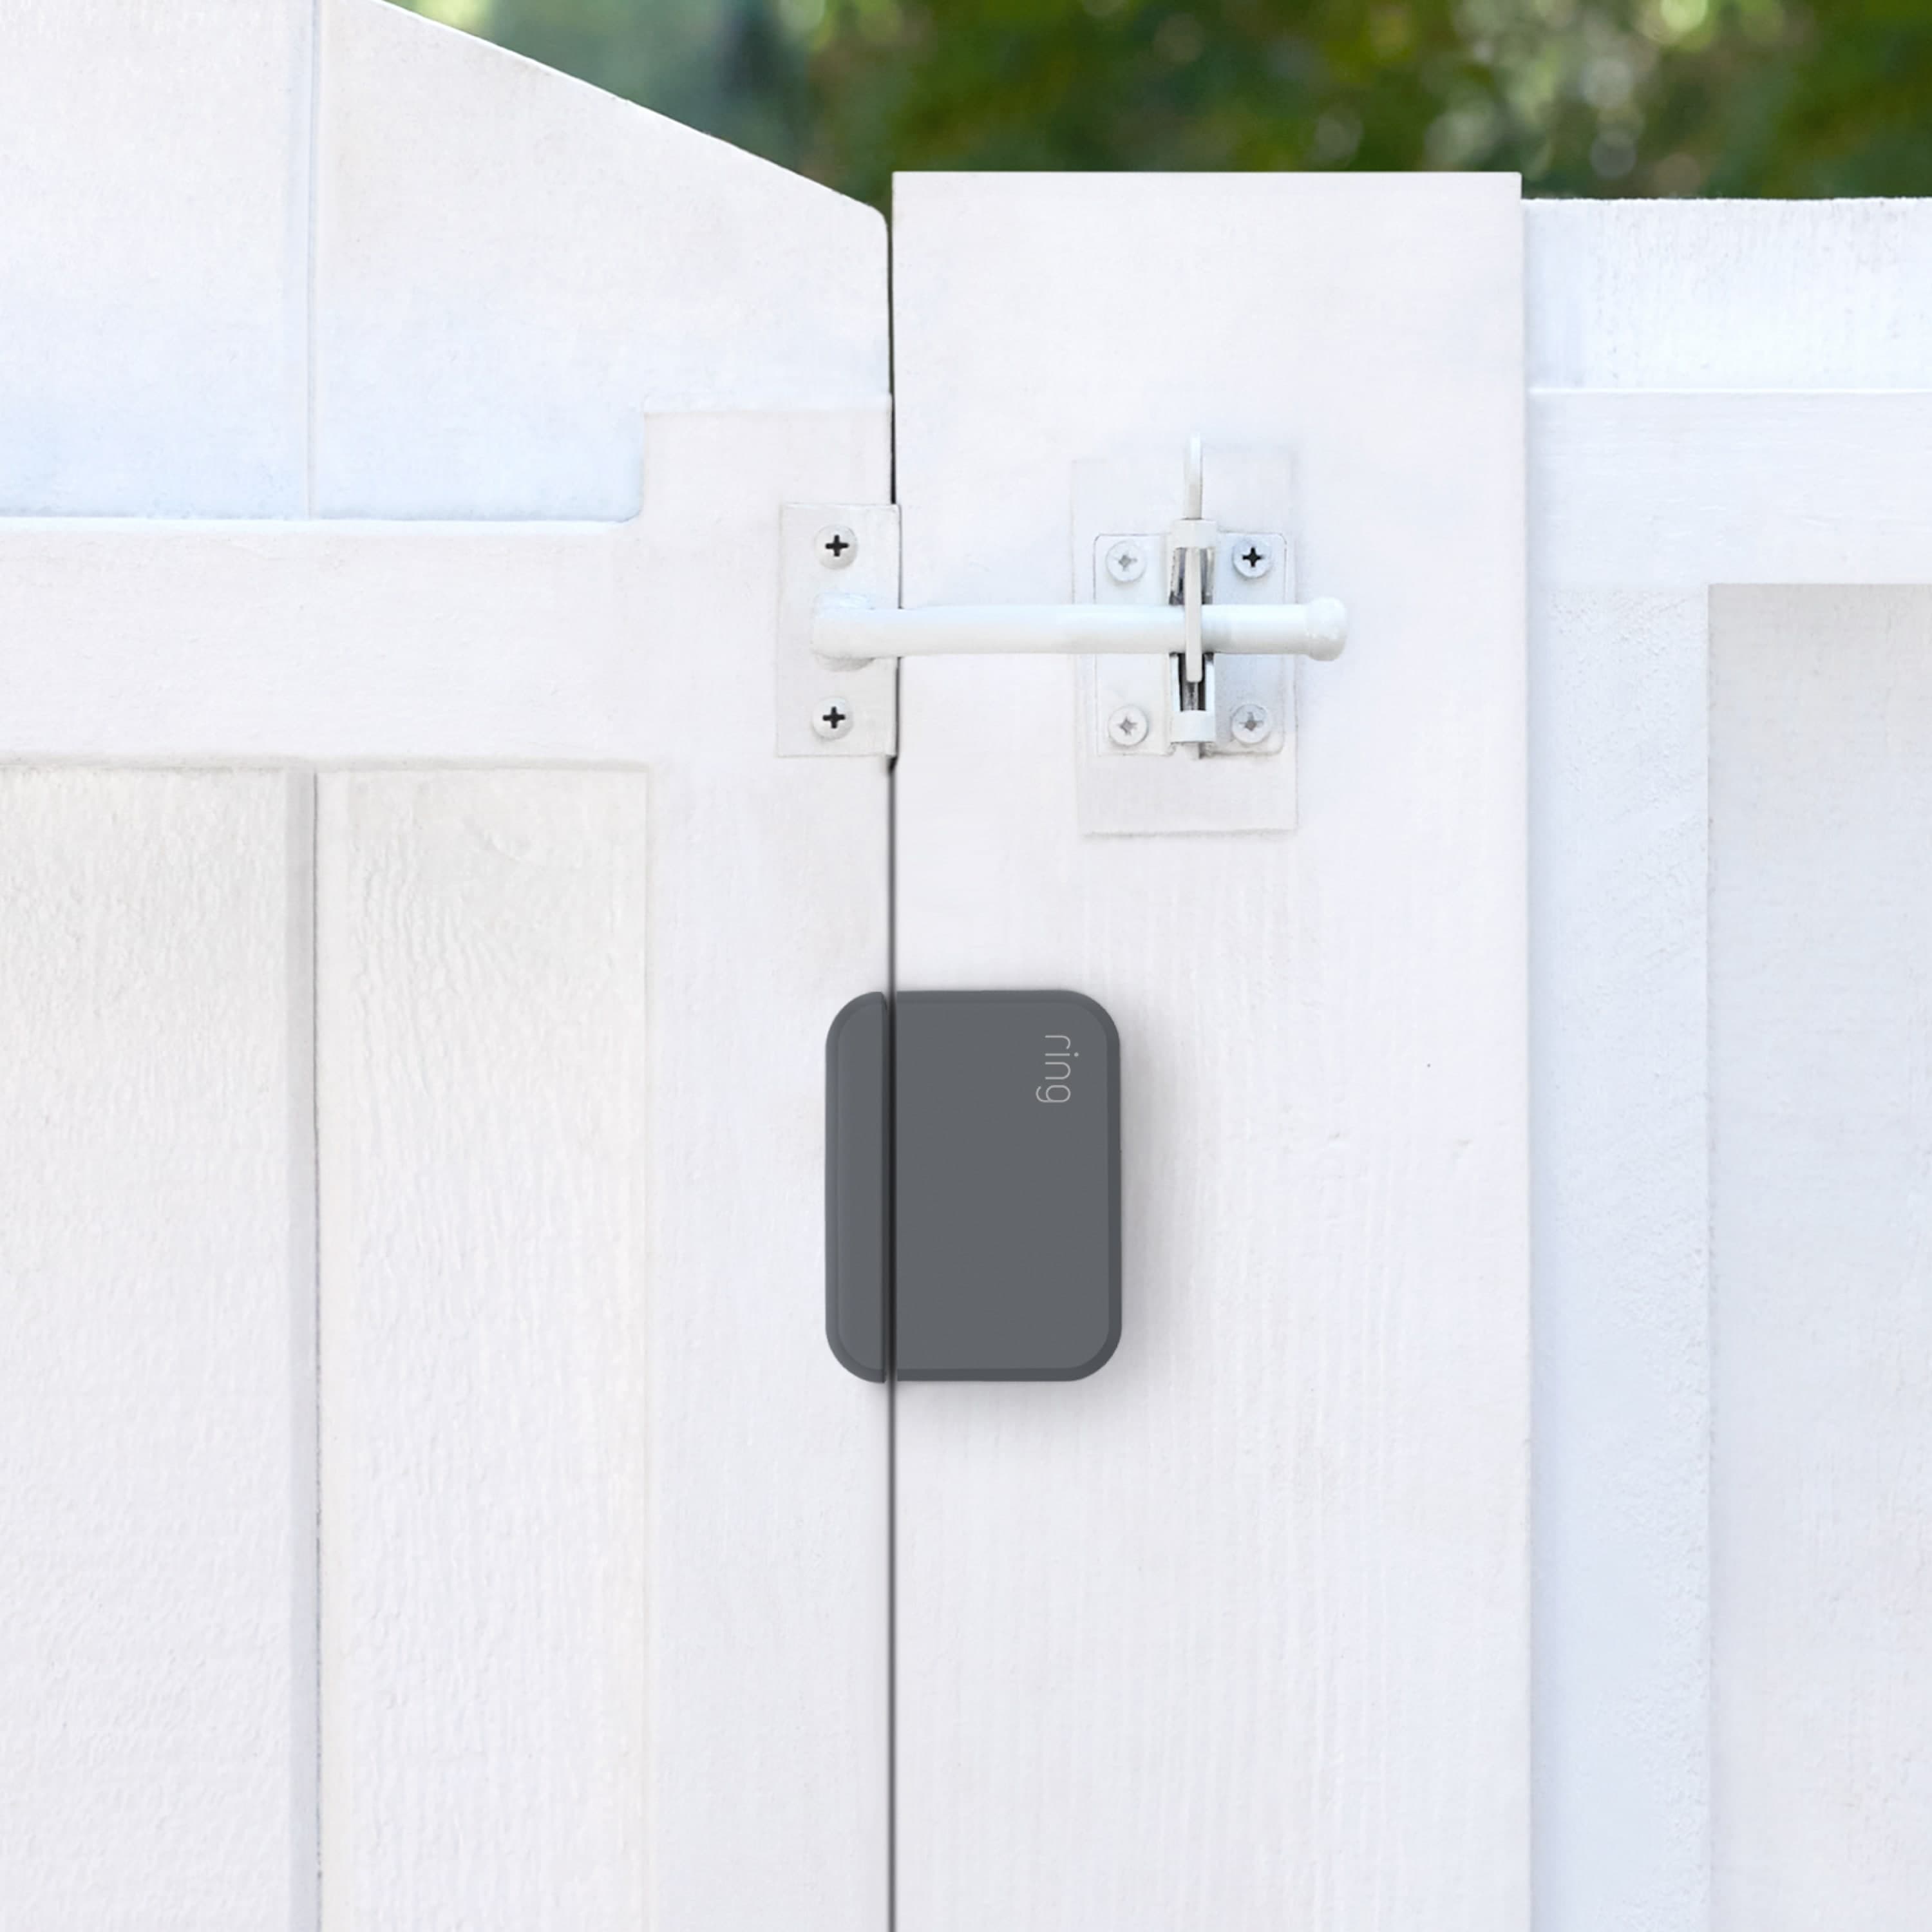 Ring Alarm Outdoor Contact Sensor - Ring Alarm Outdoor Contact SensorRing Alarm Outdoor Contact Sensor installed on the inside of a gate.